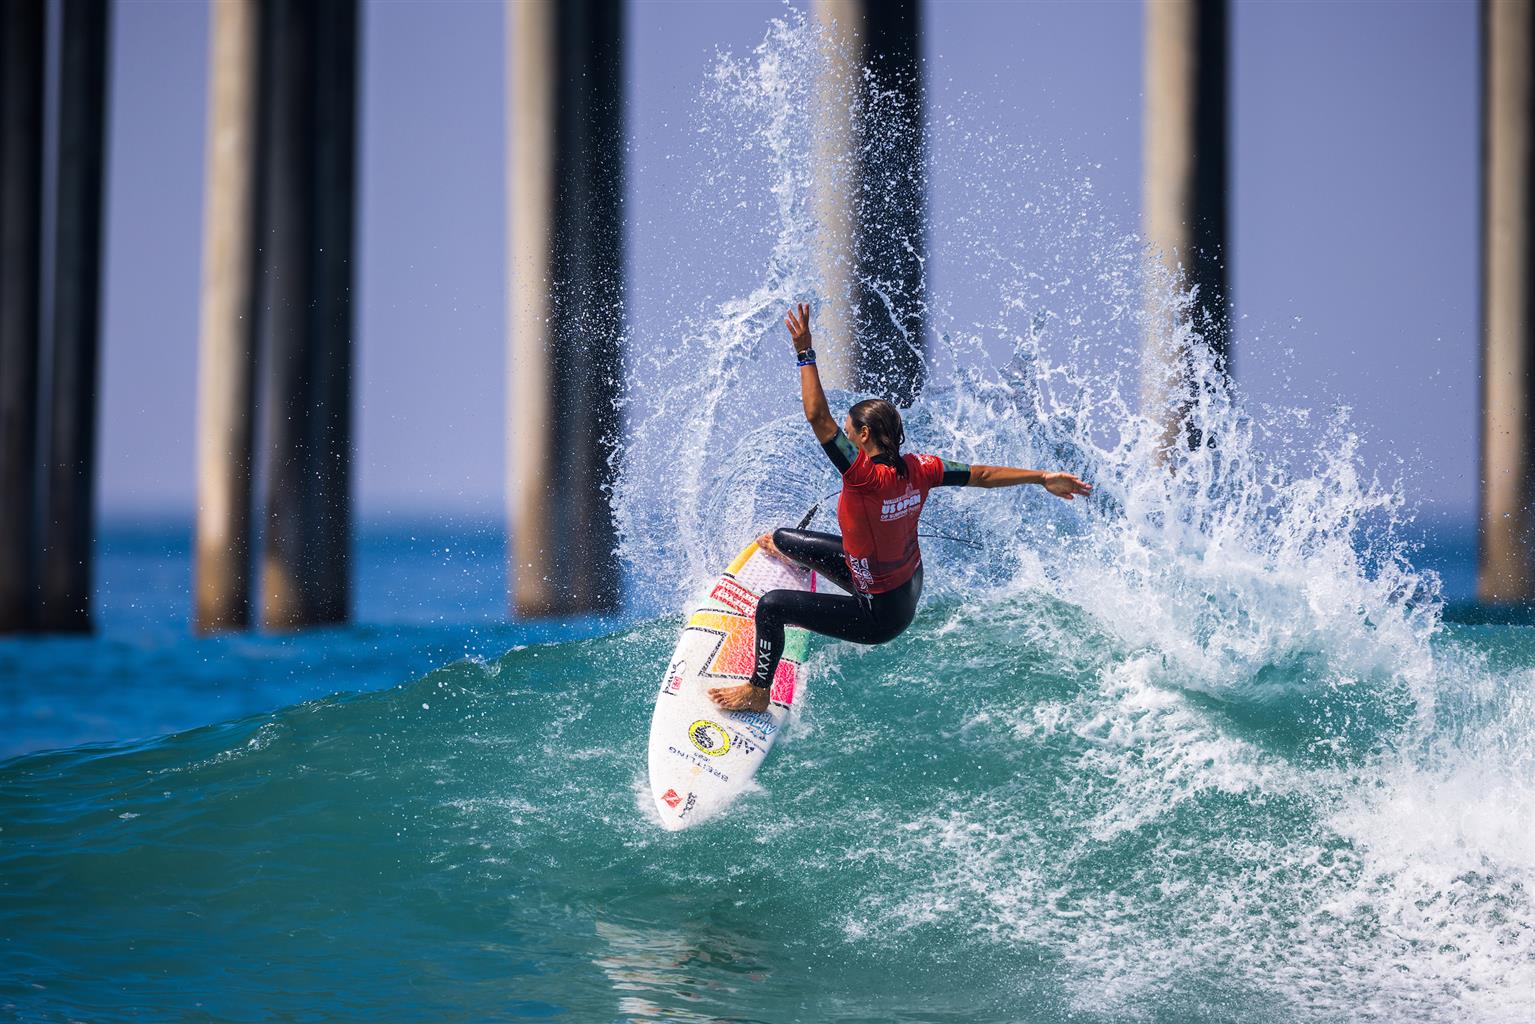 Hurley Surfer Eli Hanneman Wins the Wallex US Open of Surfing Presented by  Pacifico